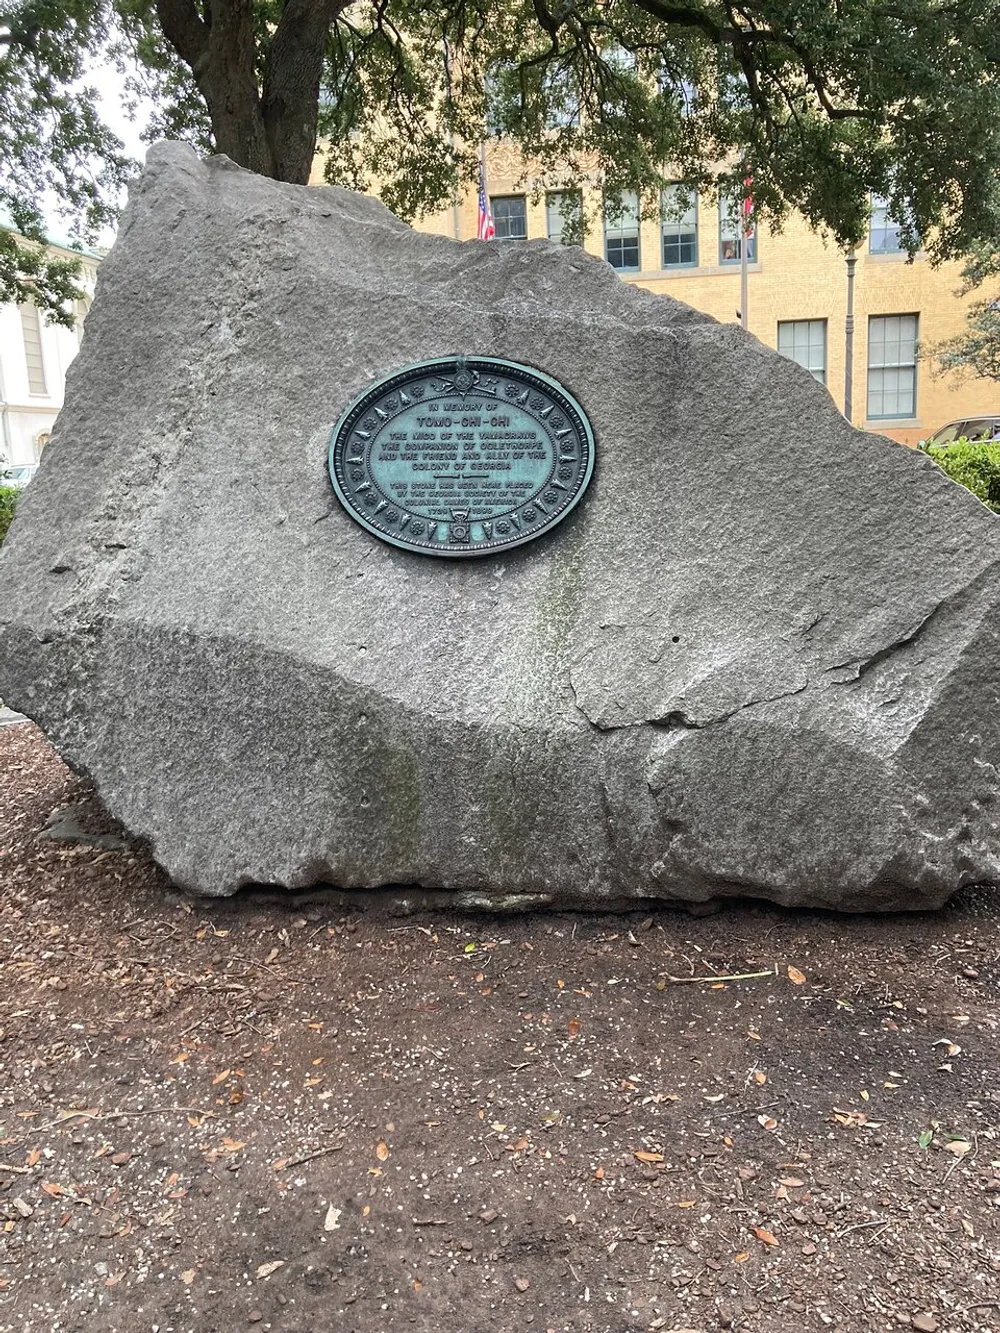 The image shows a large rock with a circular historical marker plaque attached to it located in an outdoor setting with trees and a building in the background